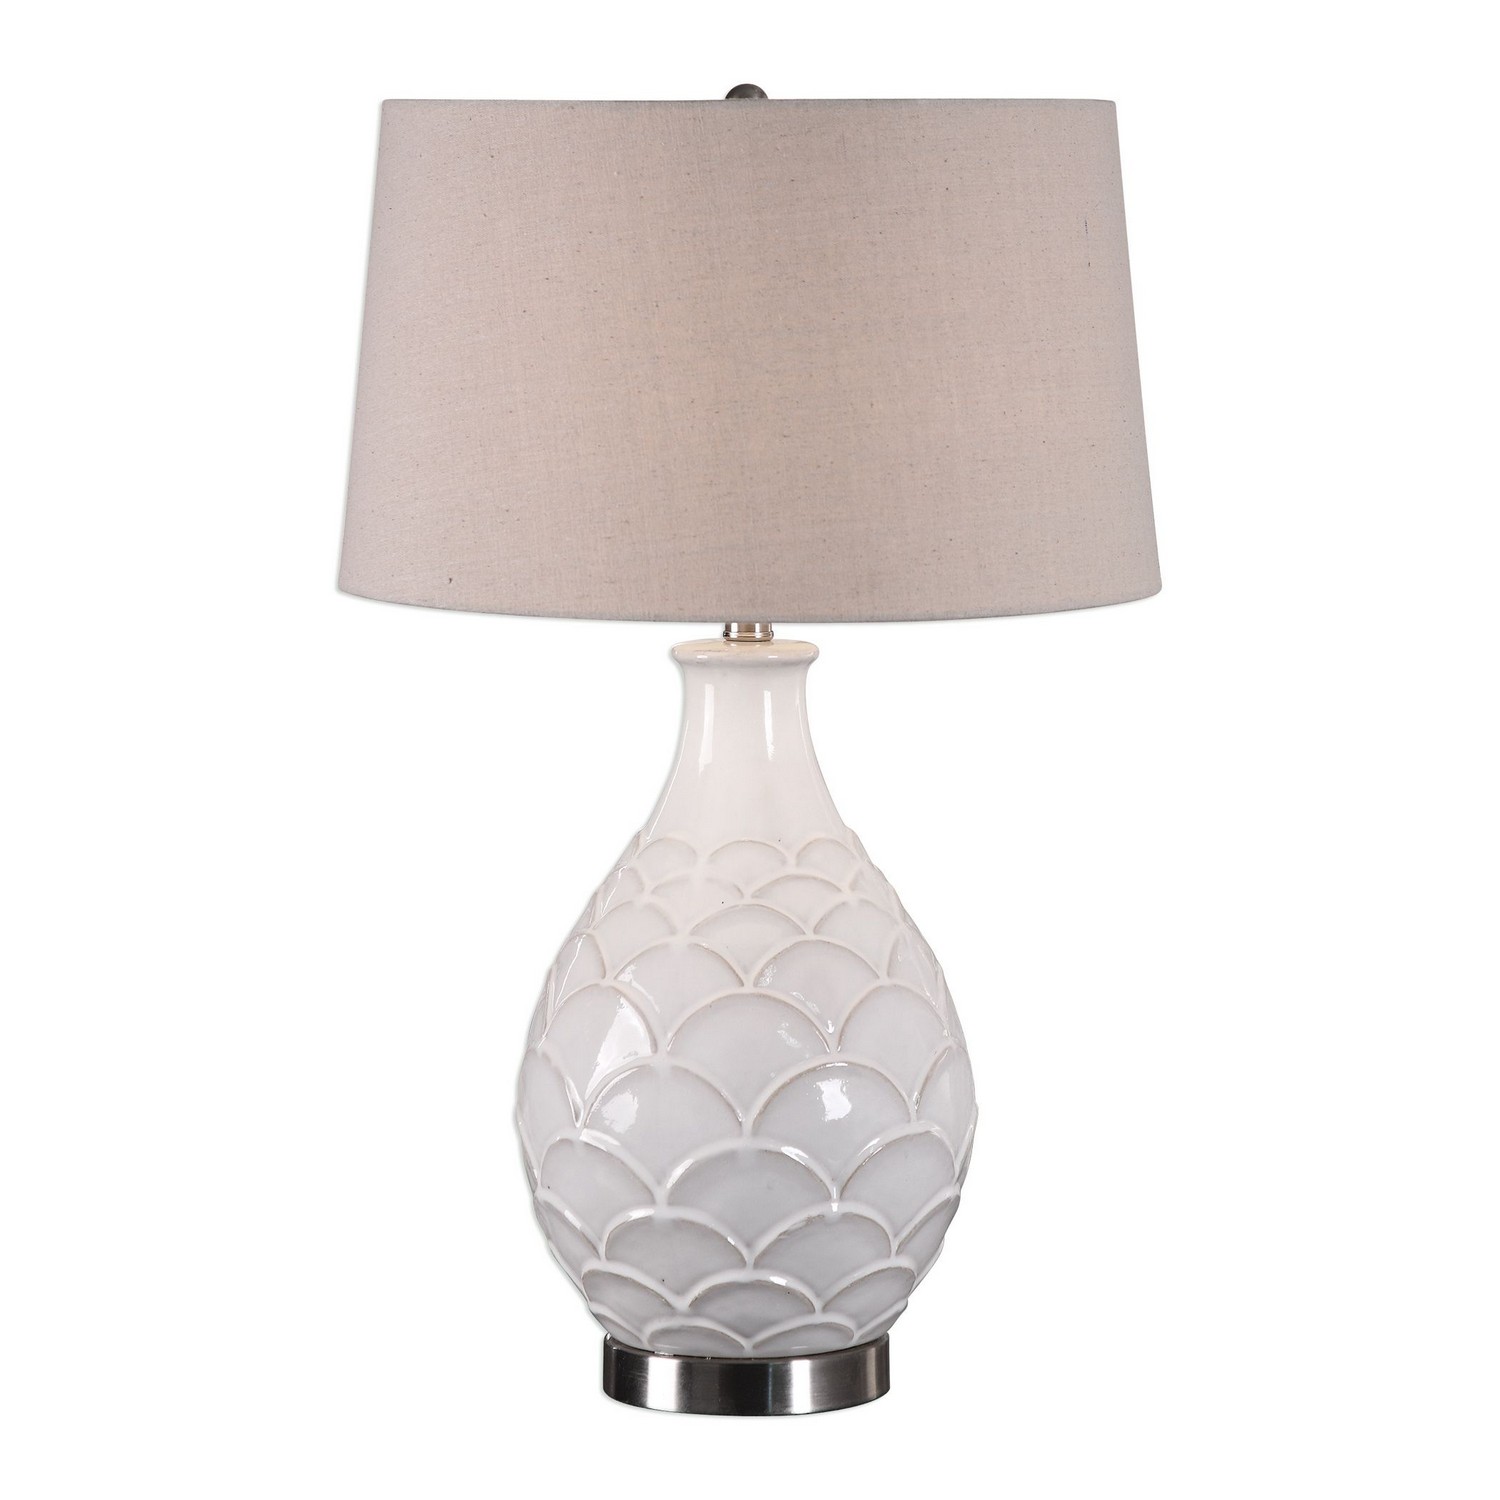 Uttermost Camellia Table Lamp - Glossed White